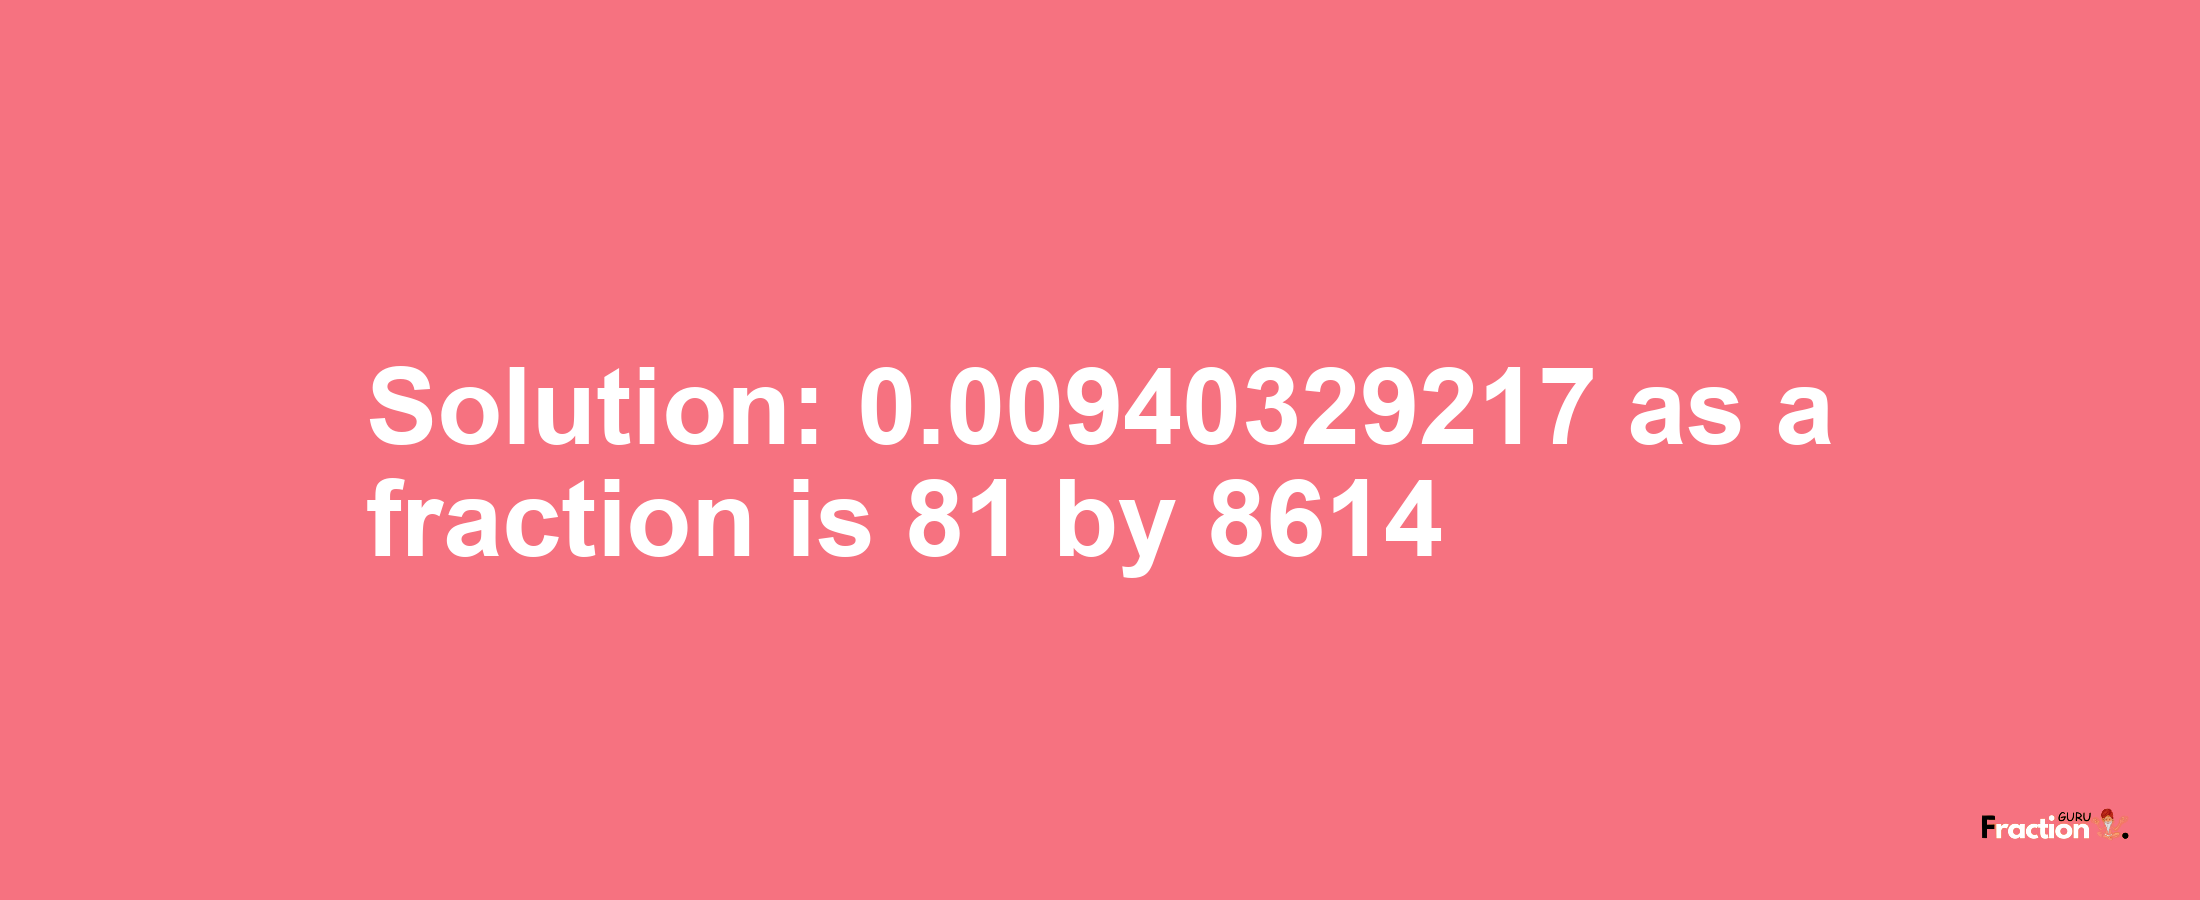 Solution:0.00940329217 as a fraction is 81/8614